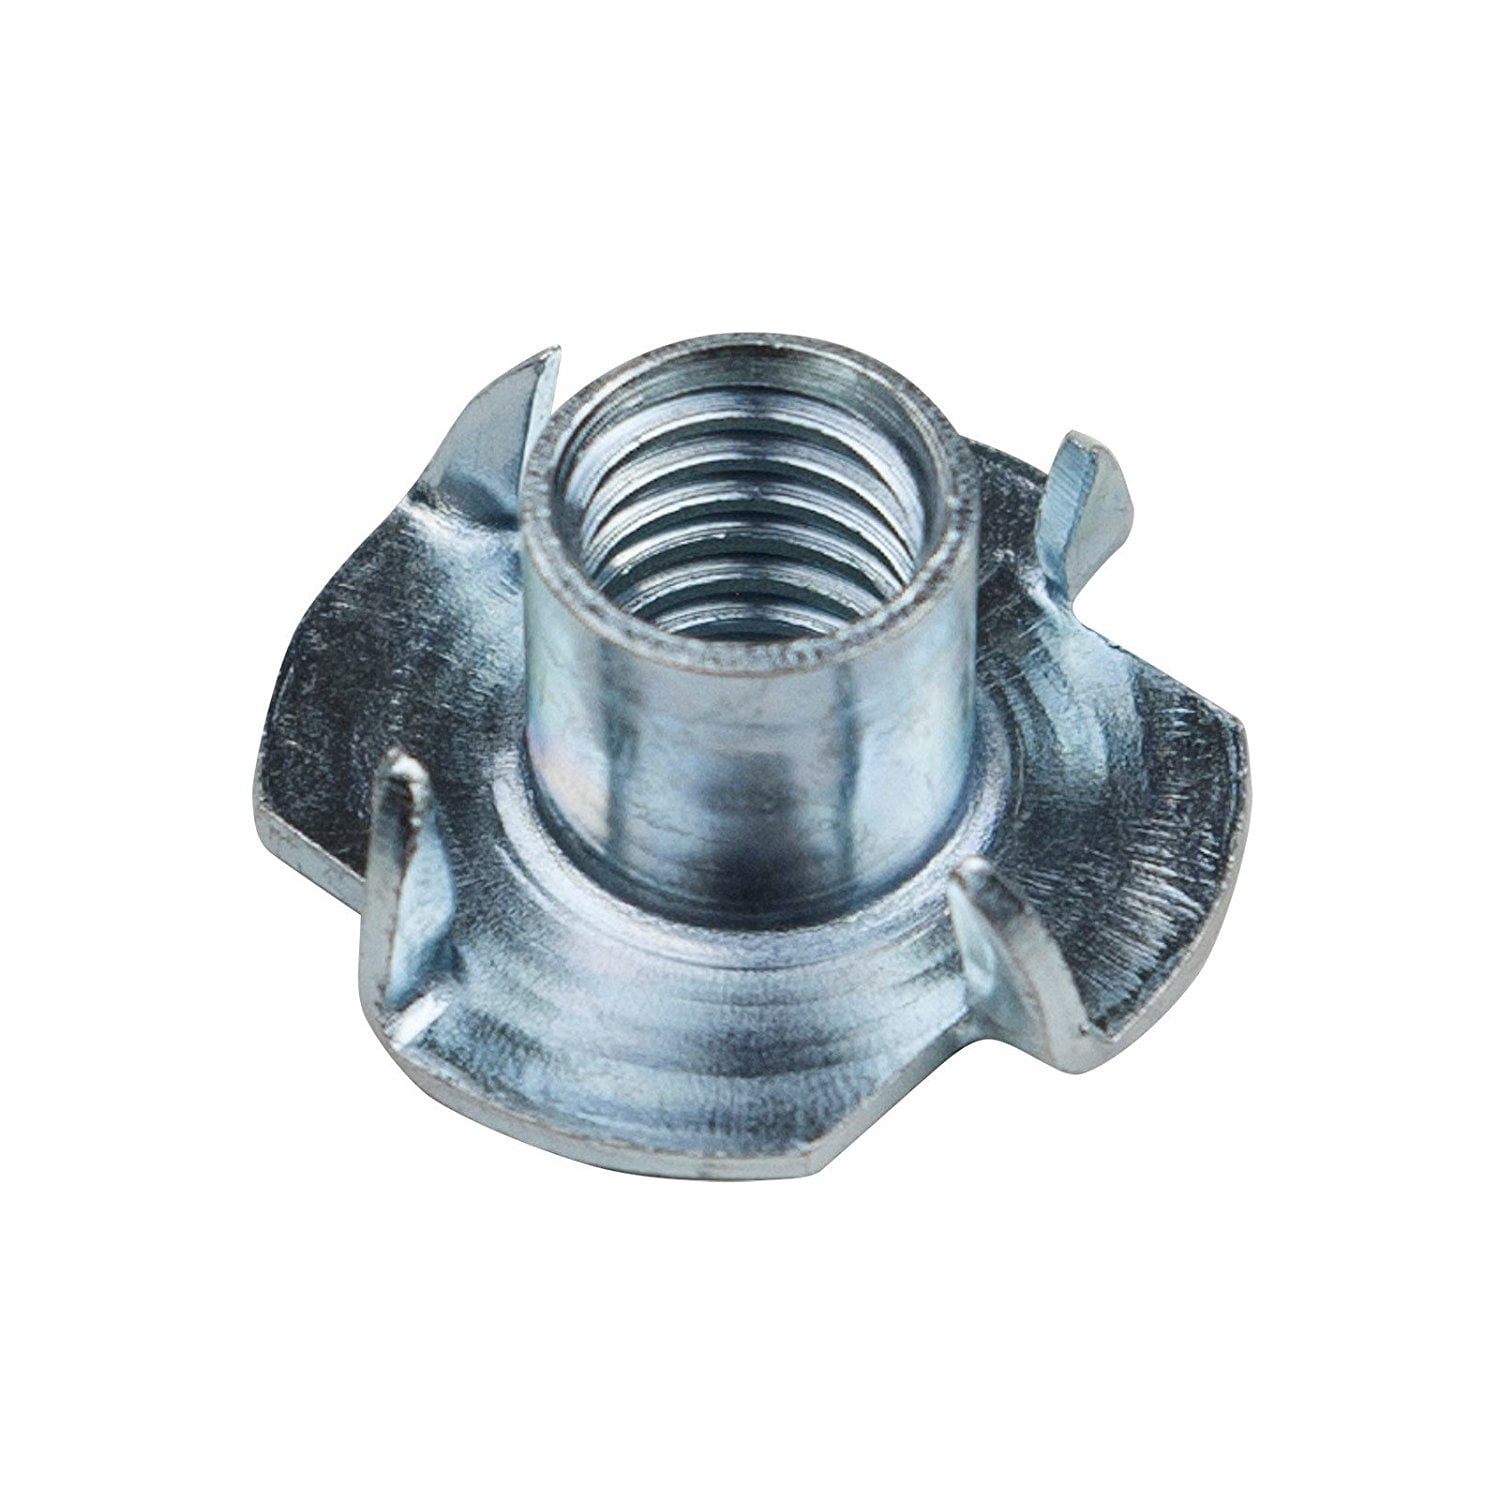 1/2"-13 Stainless Steel Pronged Tee Nuts Pack of 12 